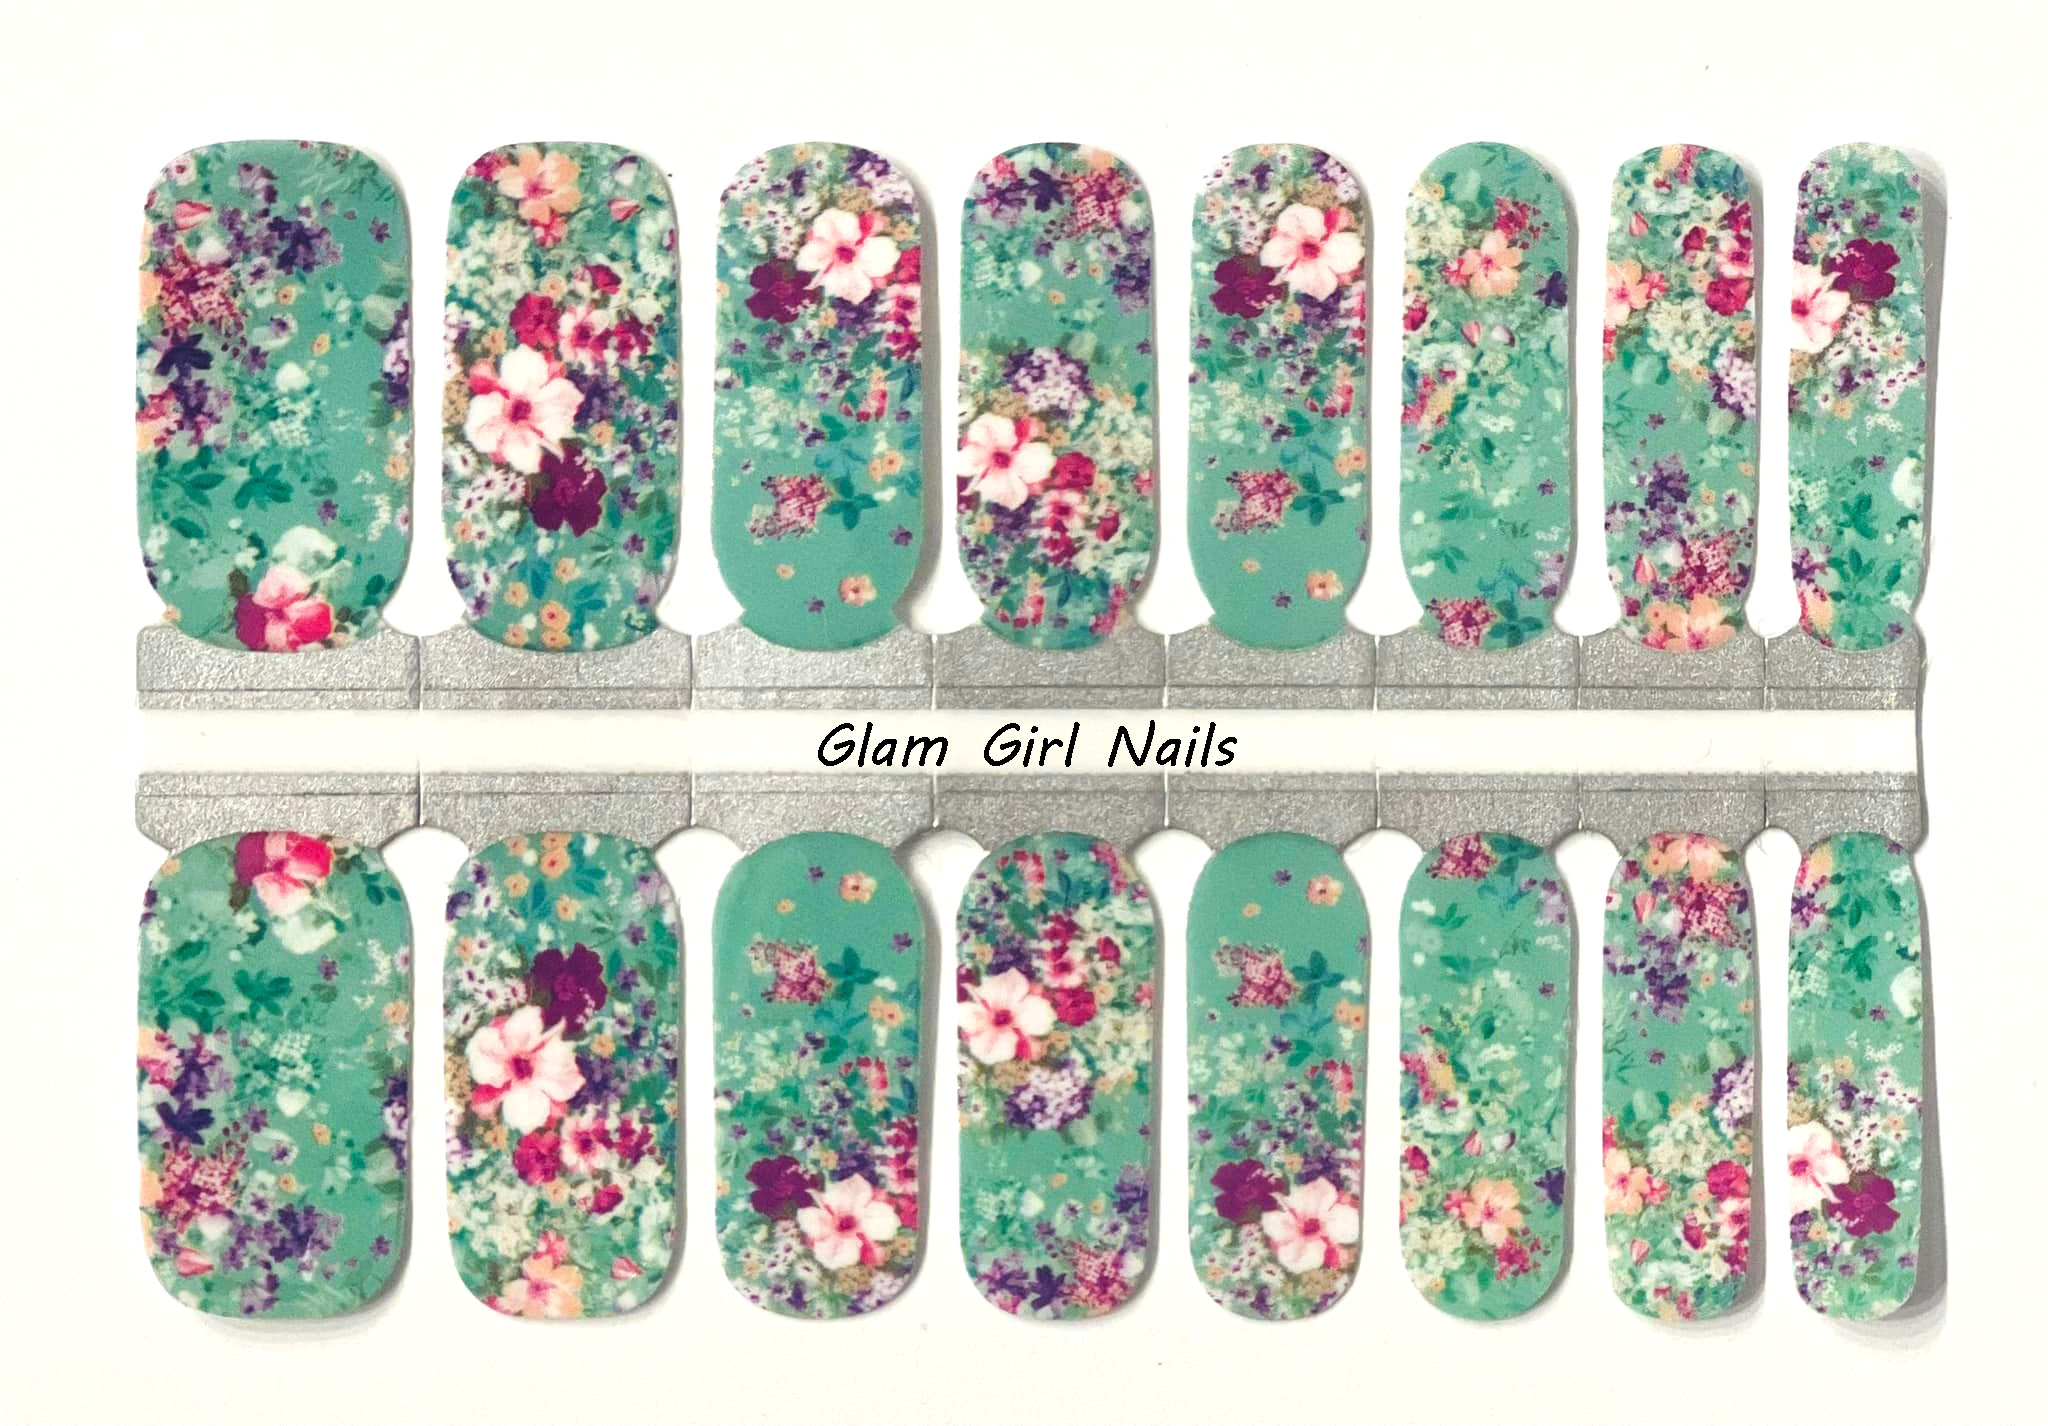 Purple and Green Floral Nail Wraps - Glam Girl Nails